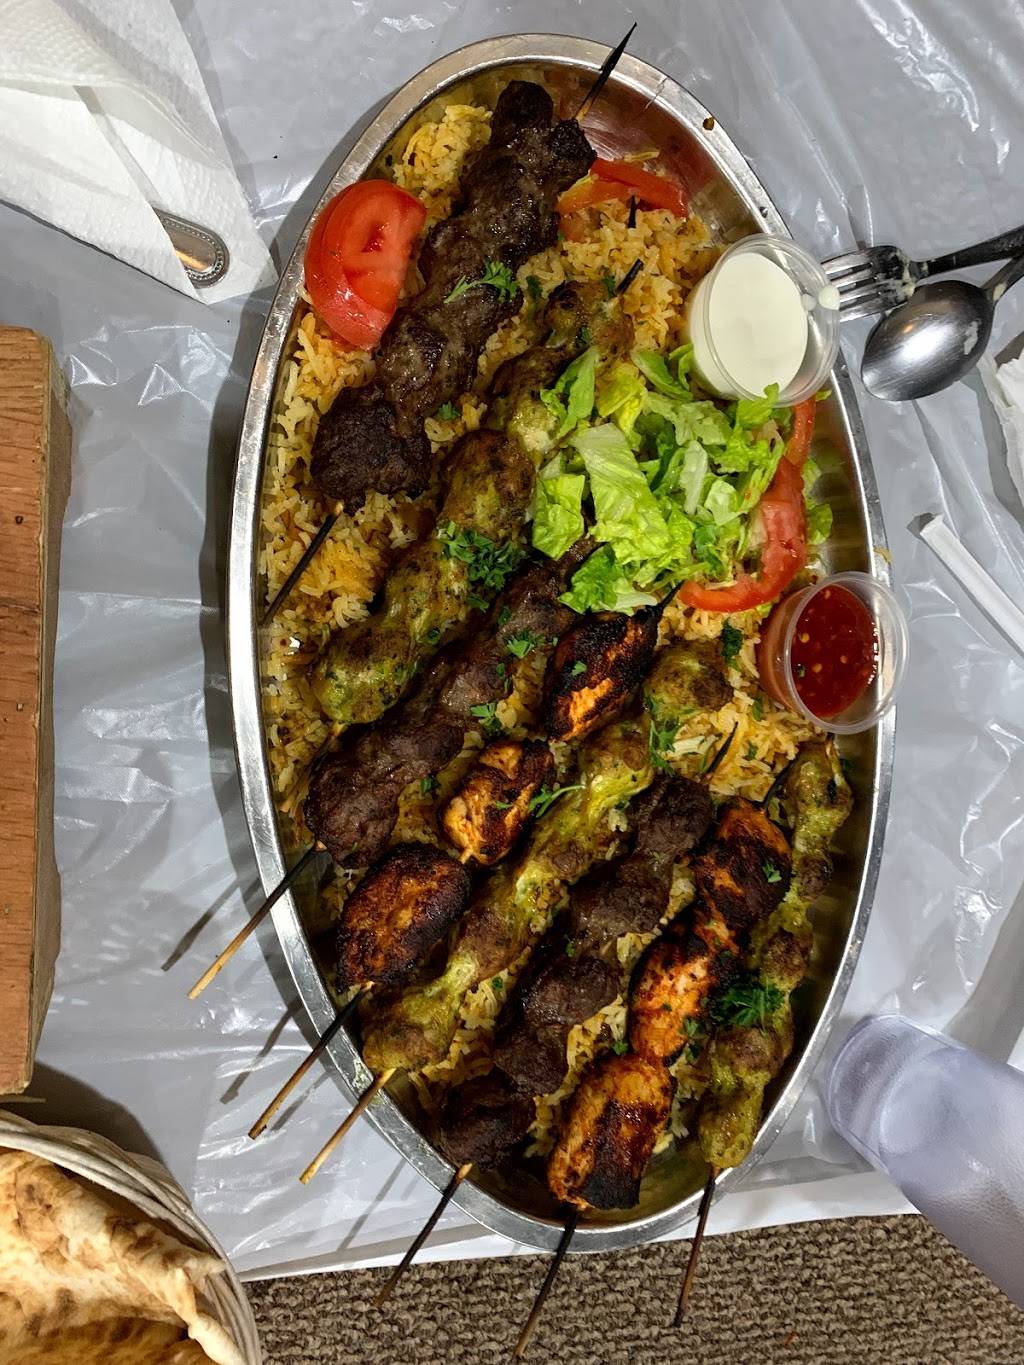 Al-Rayan restaurant | restaurant | 4873 West 38th Street, Indianapolis, IN 46254, USA | 3179867554 OR +1 317-986-7554